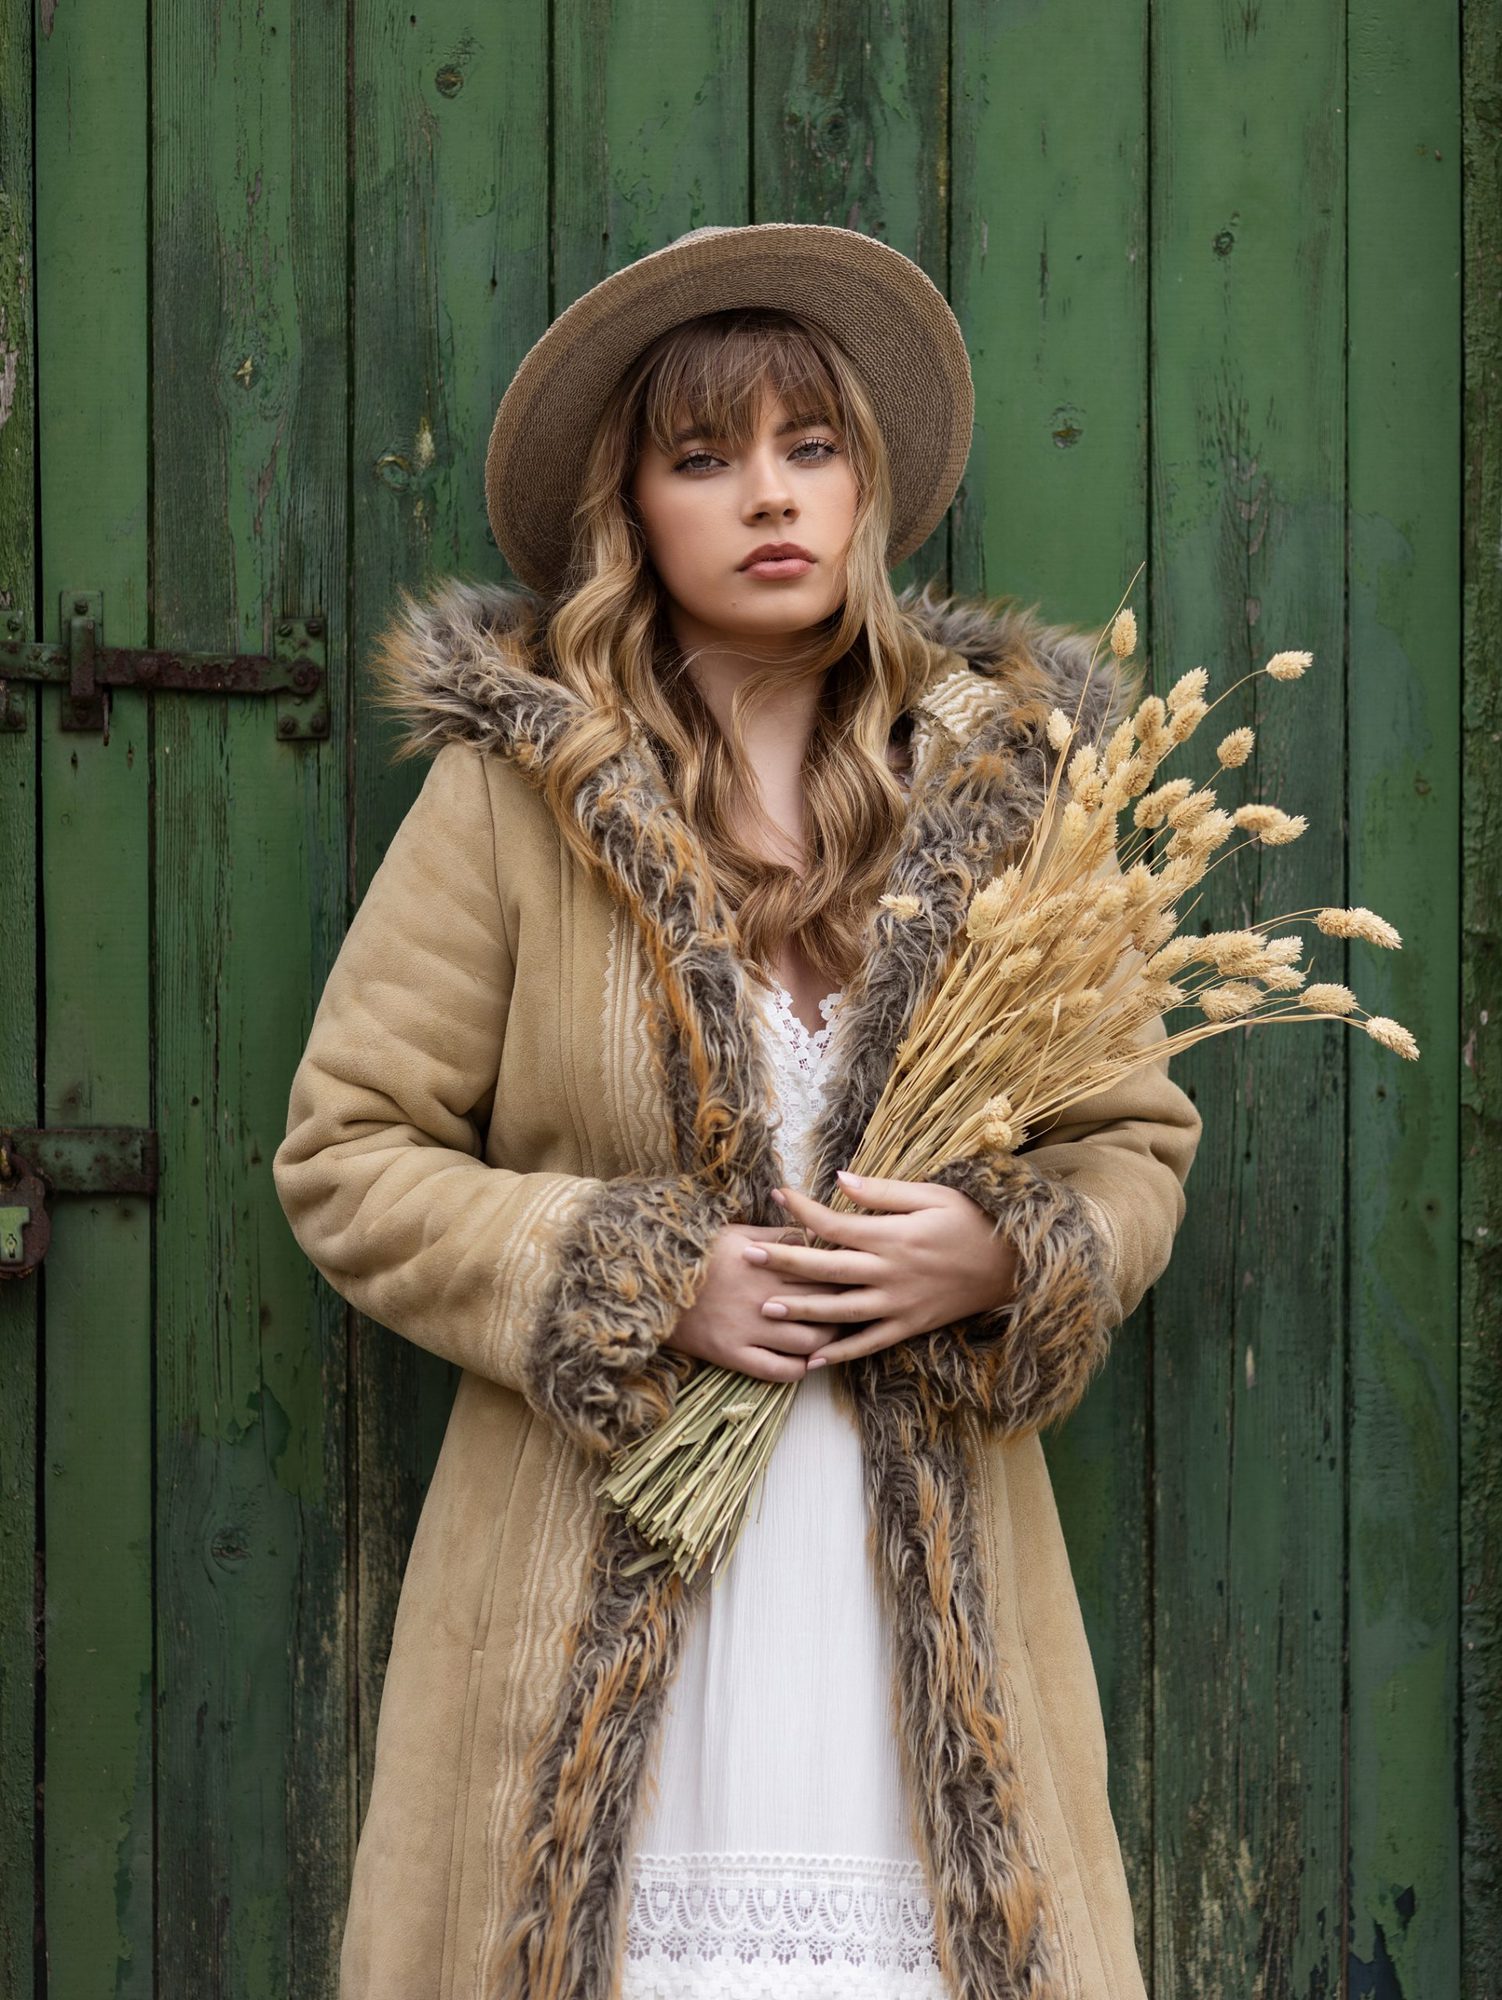 Teenage girl in a white dress neck and a sheepskin coat holds some dried flowers